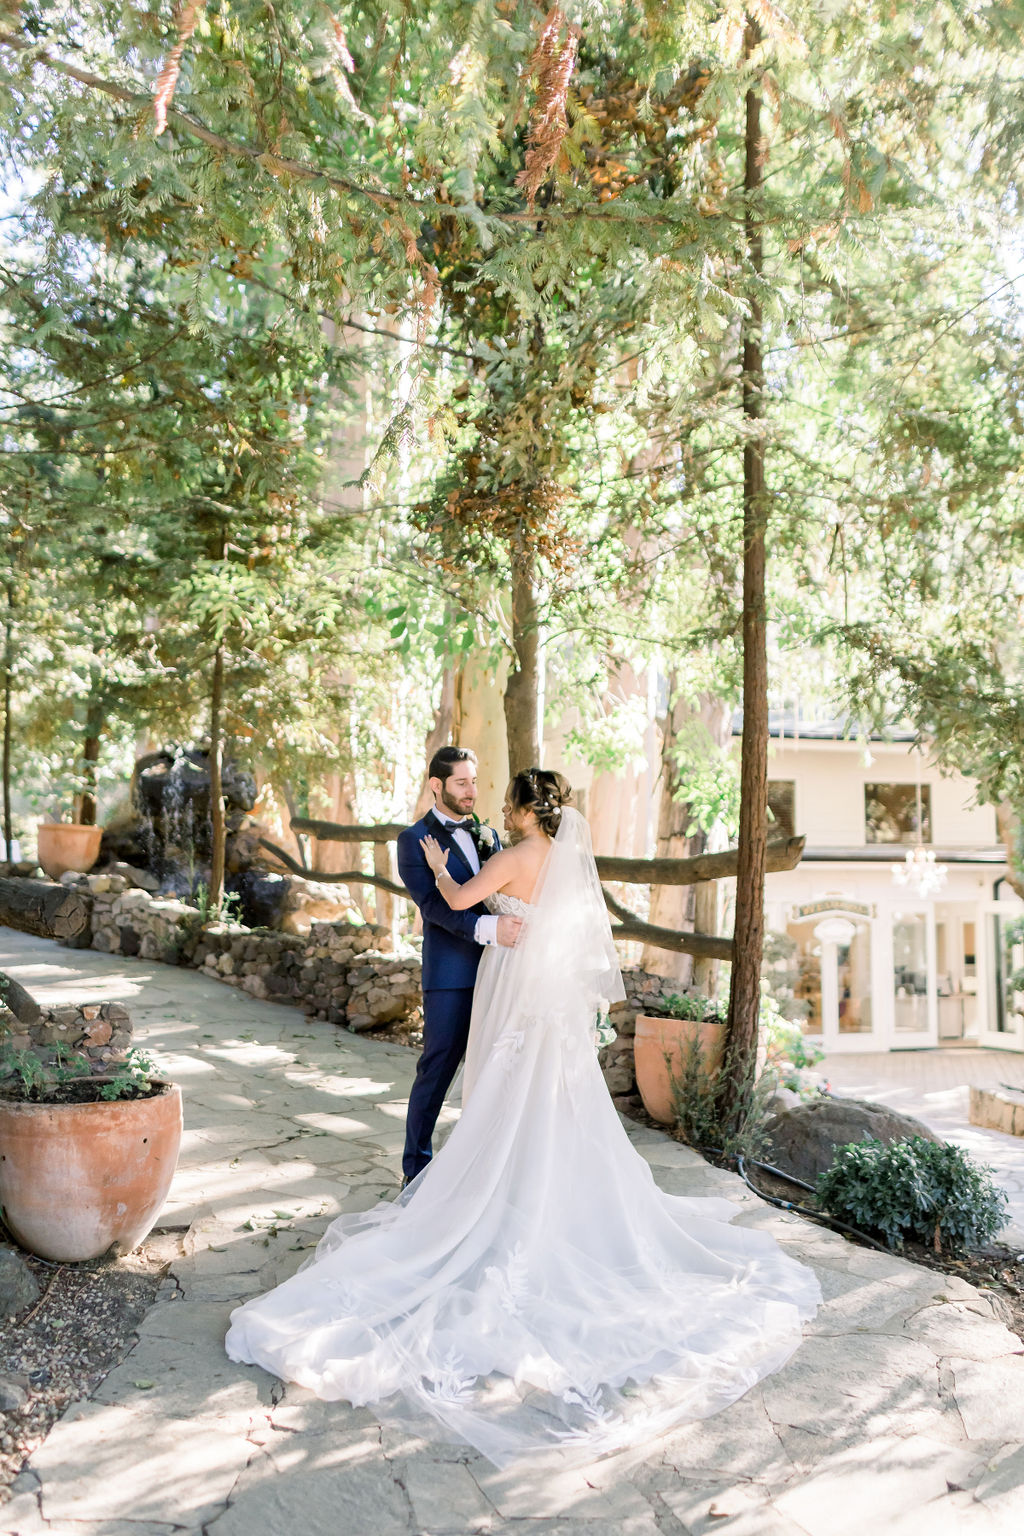 groom with paisley detail bowtie and blue tuxedo stands with bride in embellished chiffon strapless wedding dress at Calamigos Ranch